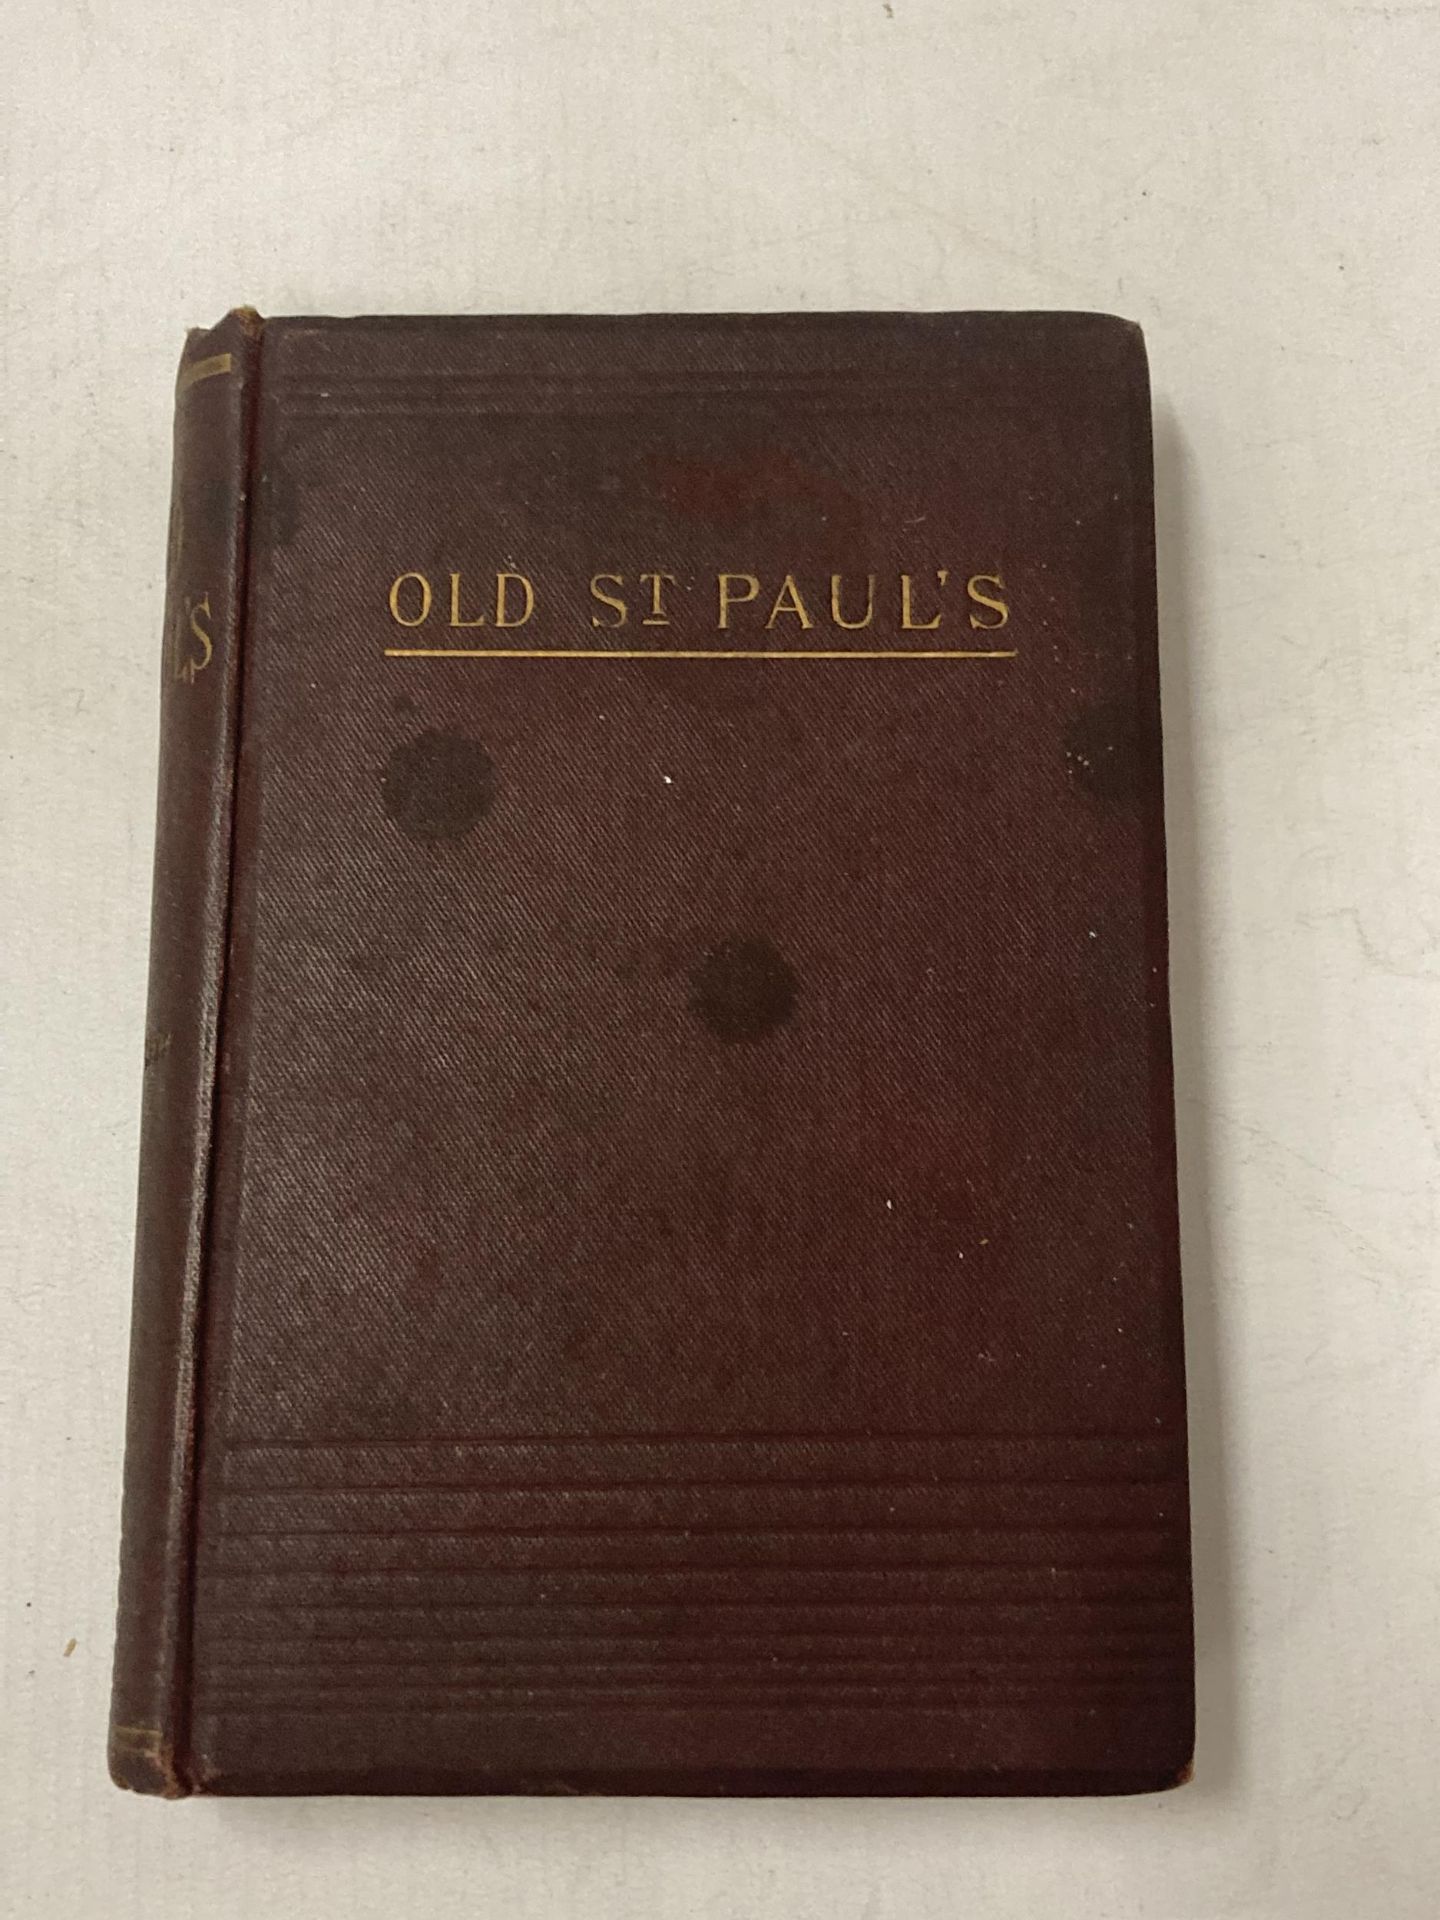 AINSWORTH WILLIAM OLD ST PAULS 1ST EDITION BOOK